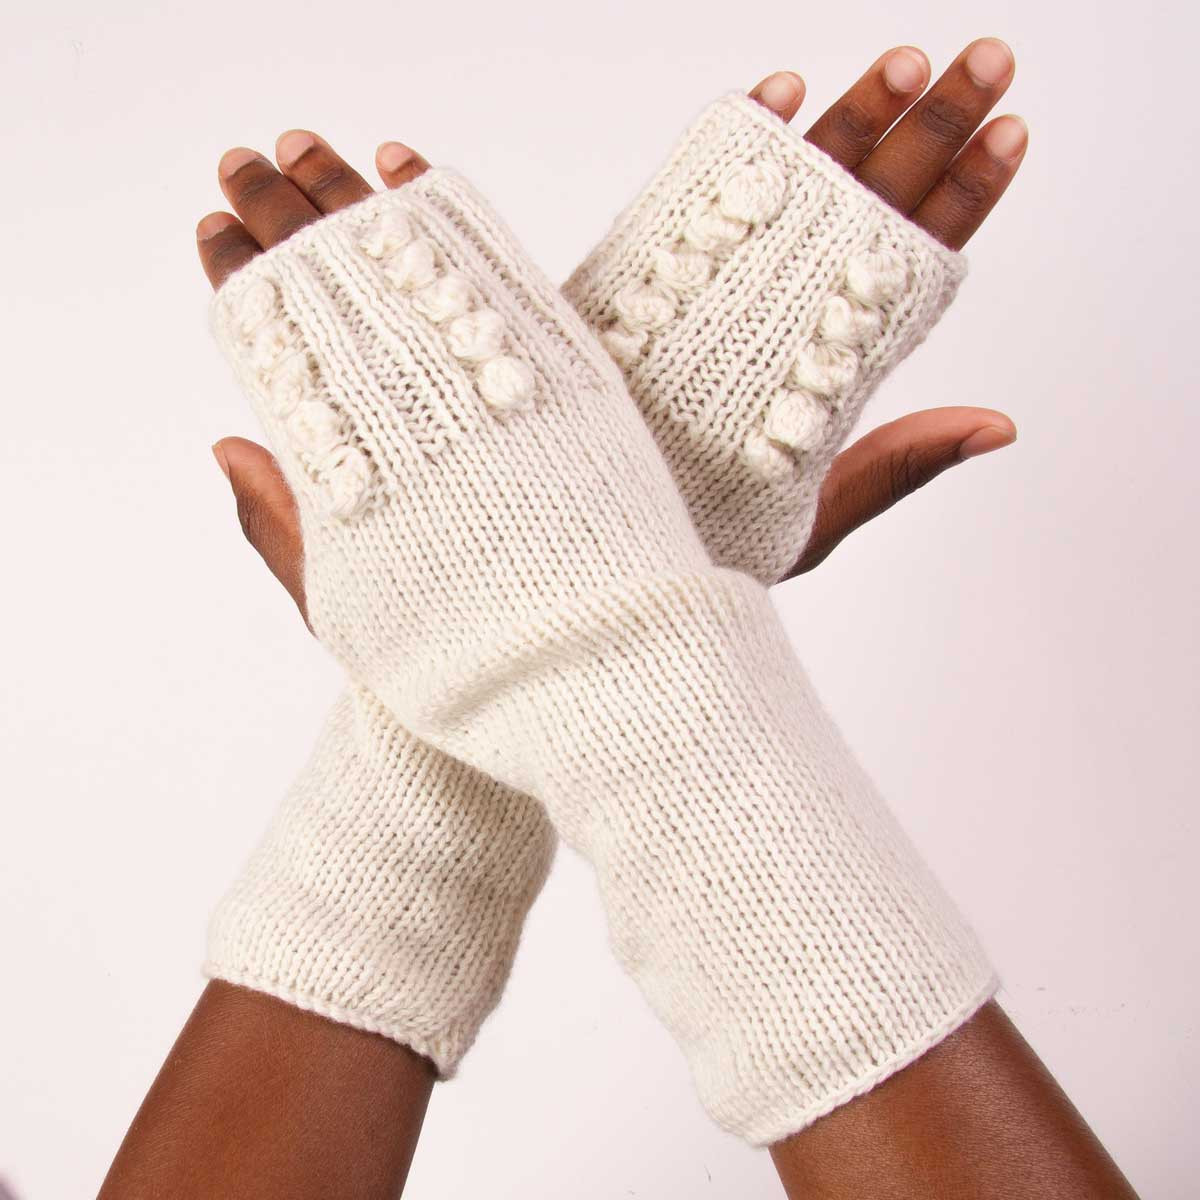 Asnelles ready-to-knit Mittens